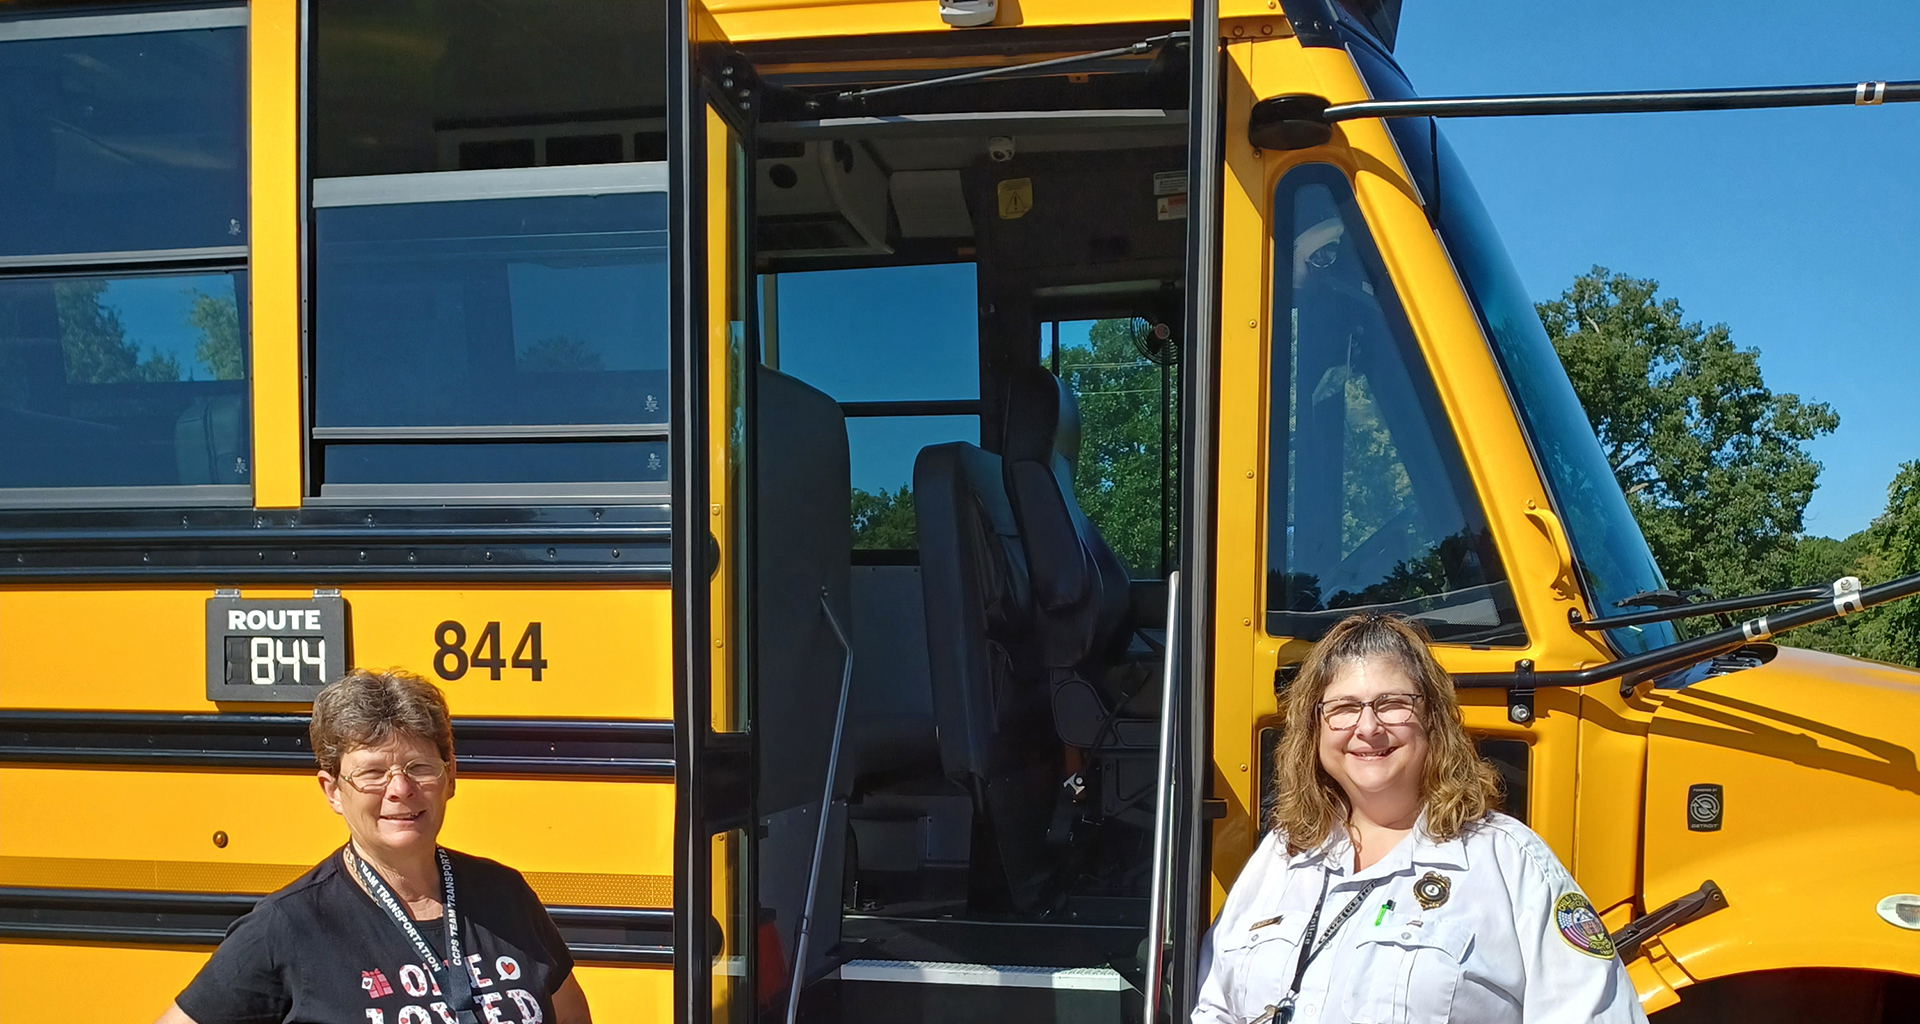 Two bus drivers pose in front of bus.